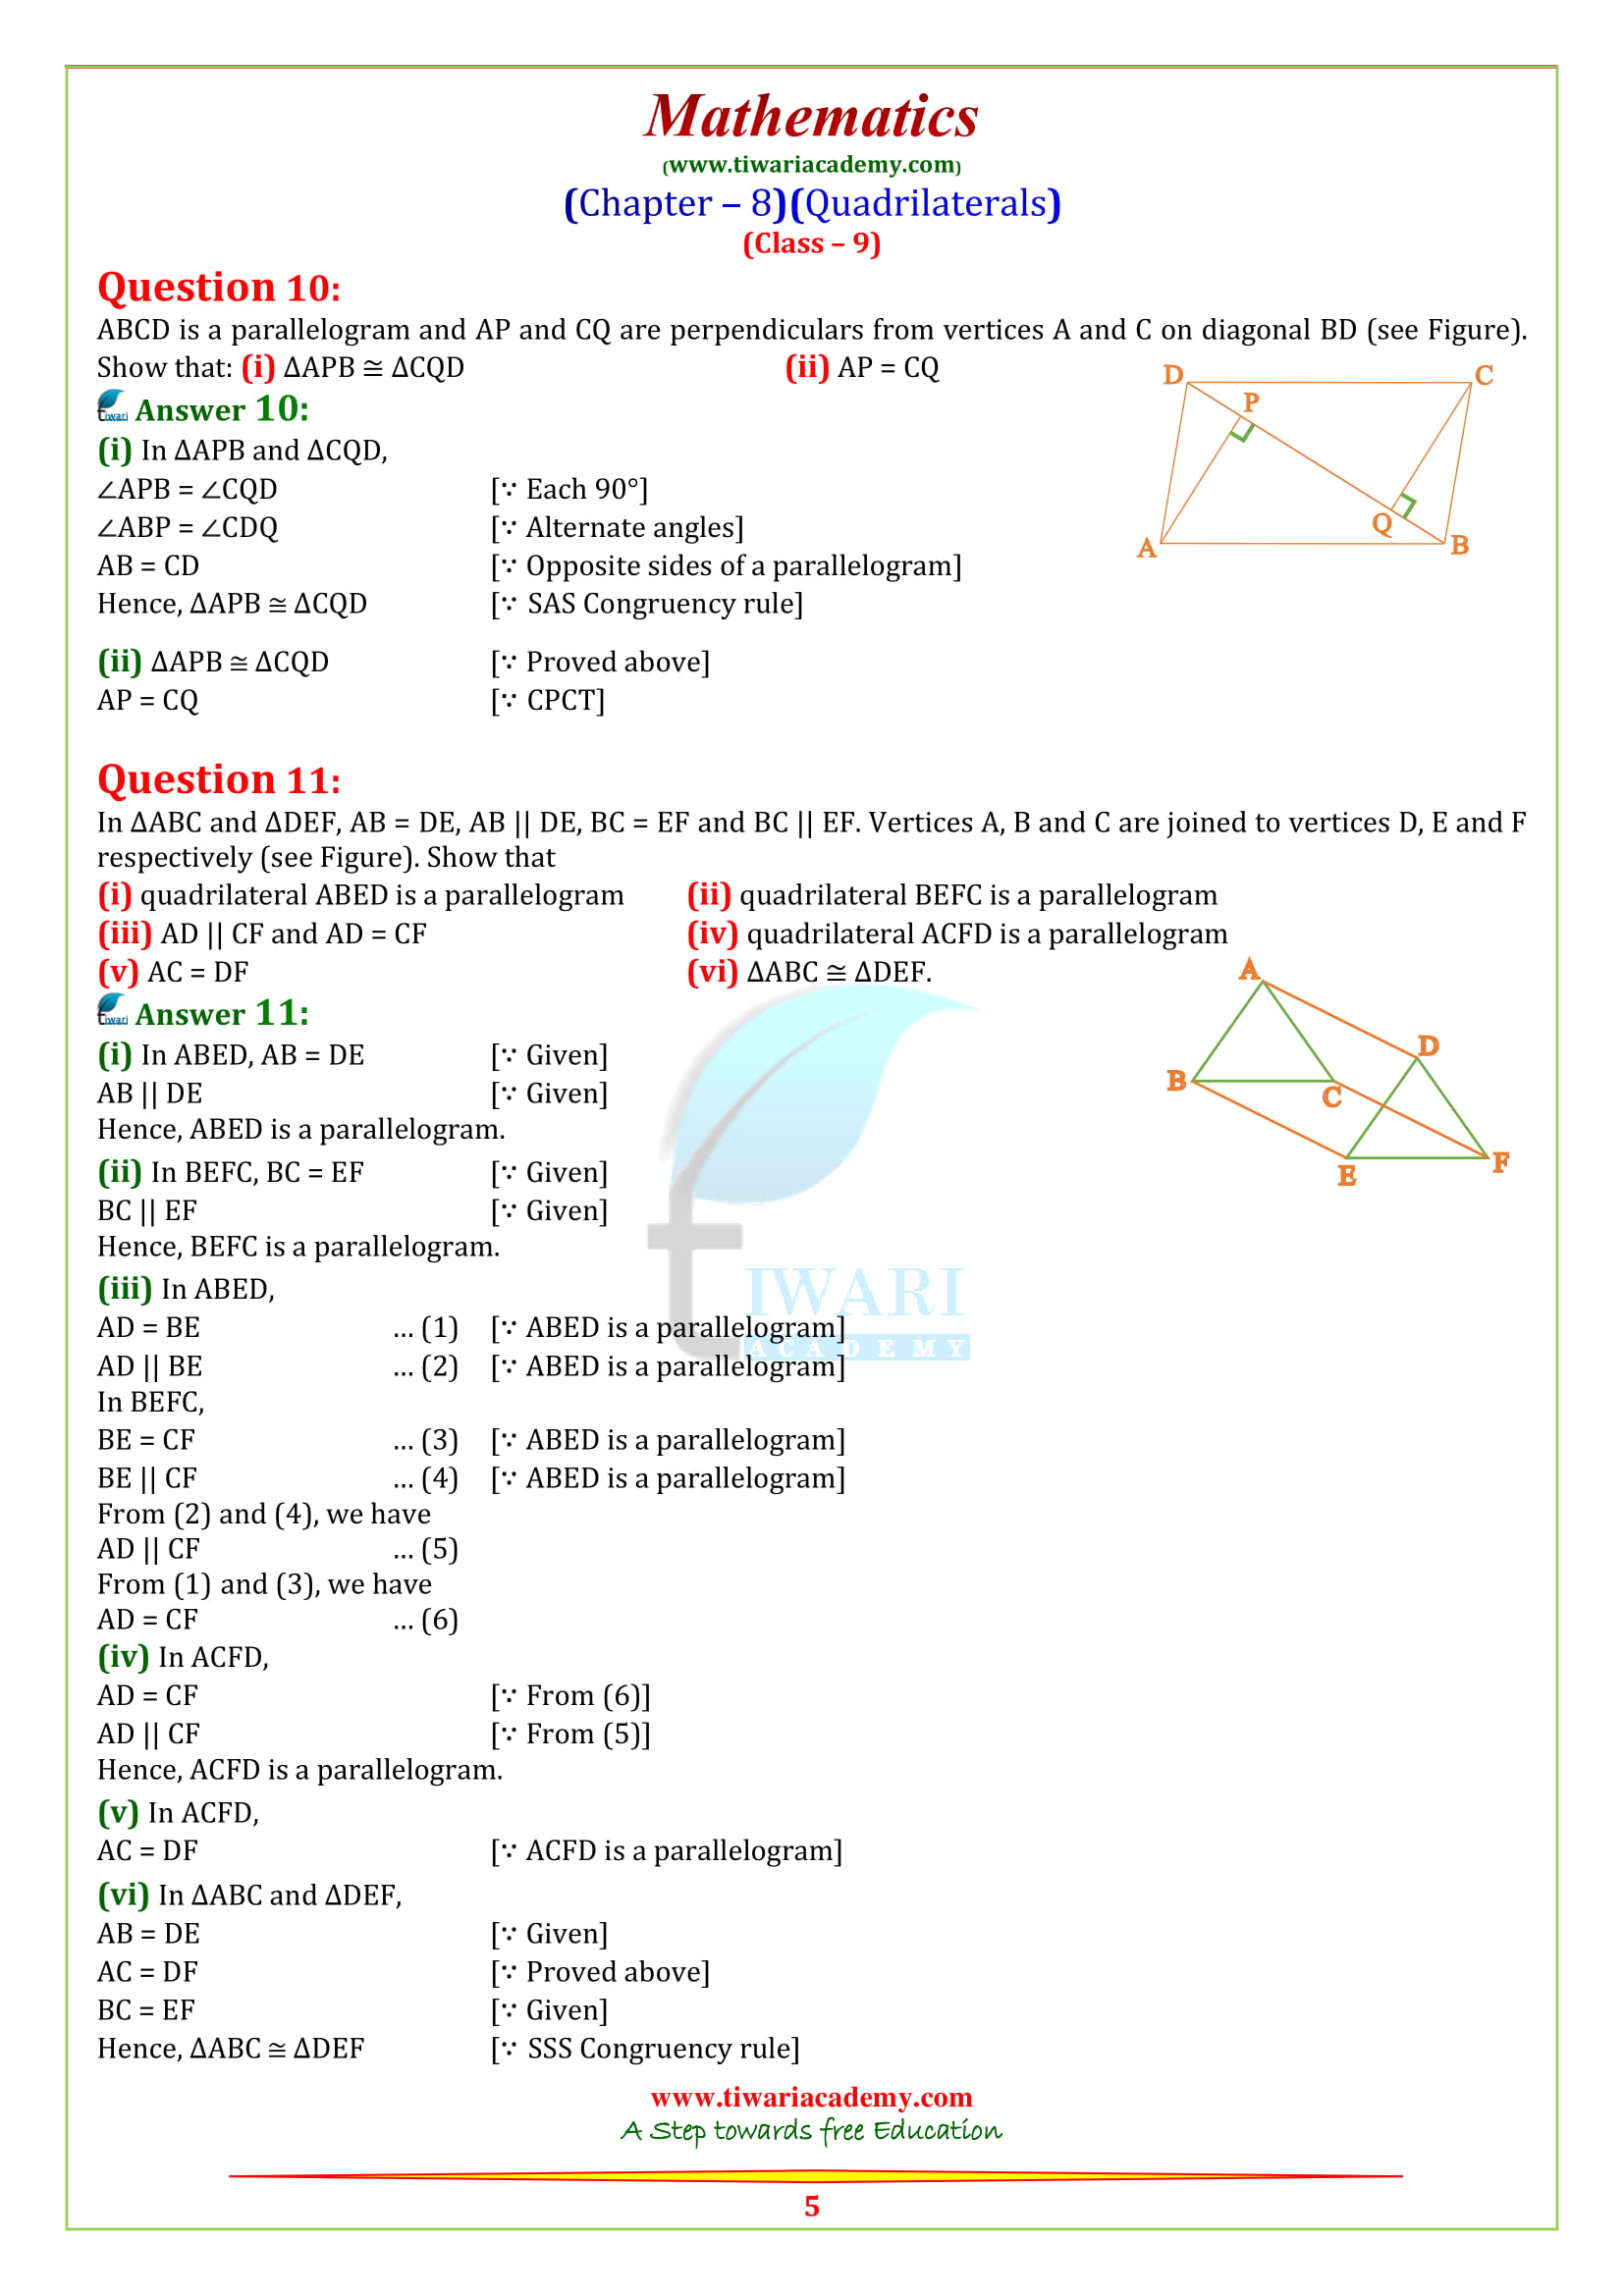 Class 9 Maths Quadrilaterals Exercise 8.1 all question answers